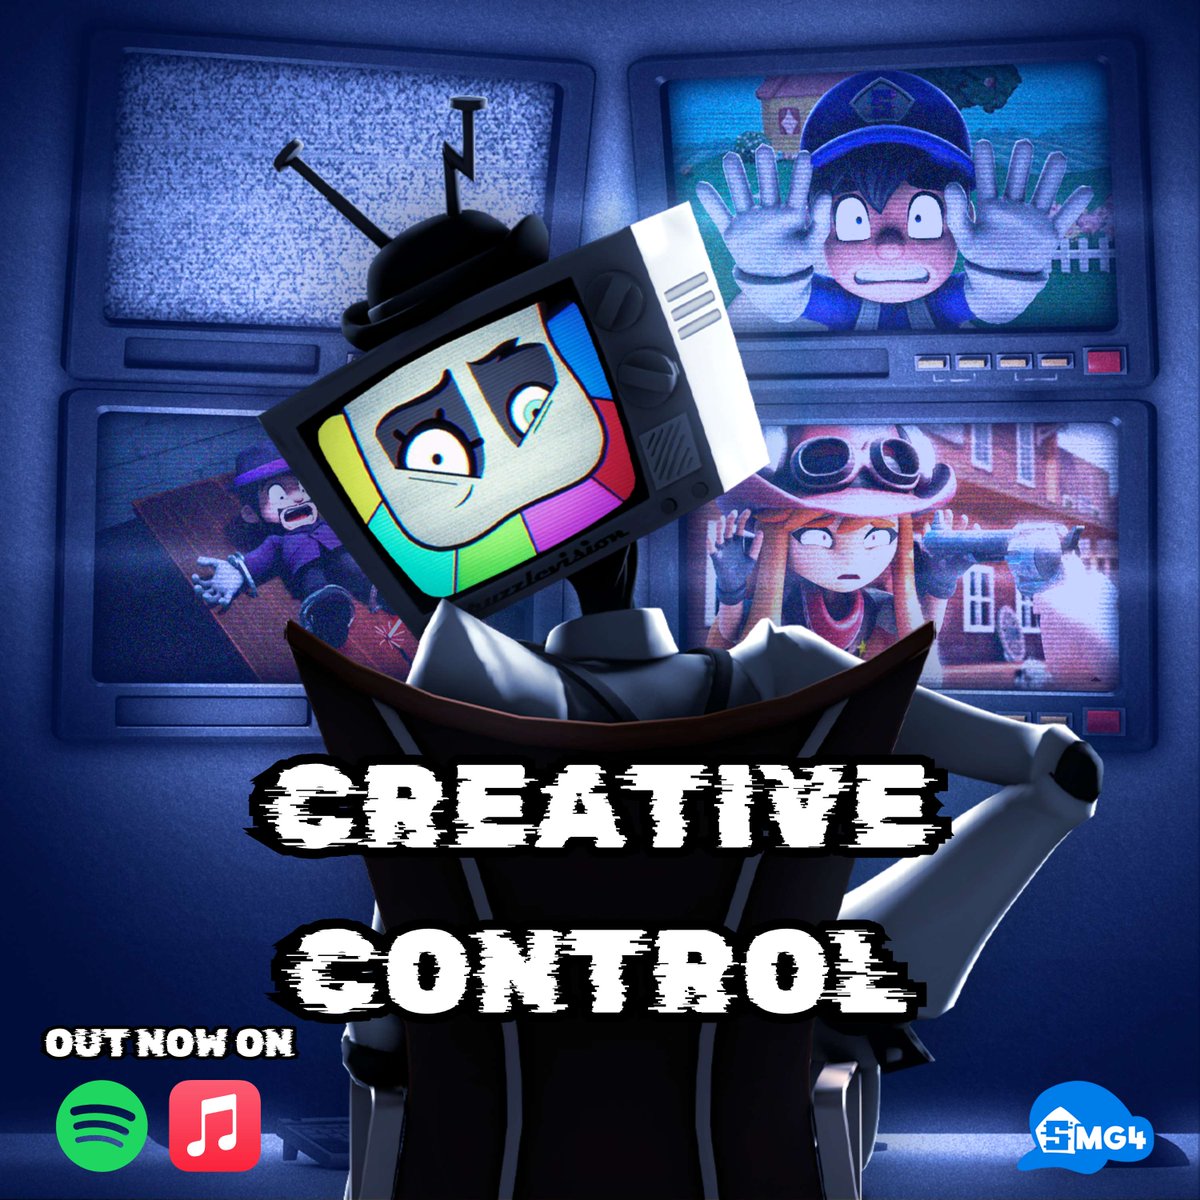 Mr Puzzle’s main villain song ‘Creative Control’ is out now on spotify and other streaming services!🎵 BIG BIG Shoutout to @ZaminationZ for producing & composing, @andromeduuh_ for mixing, @BrendanBlaber for vocals && @Elsielovelock for backing vocals 🔥